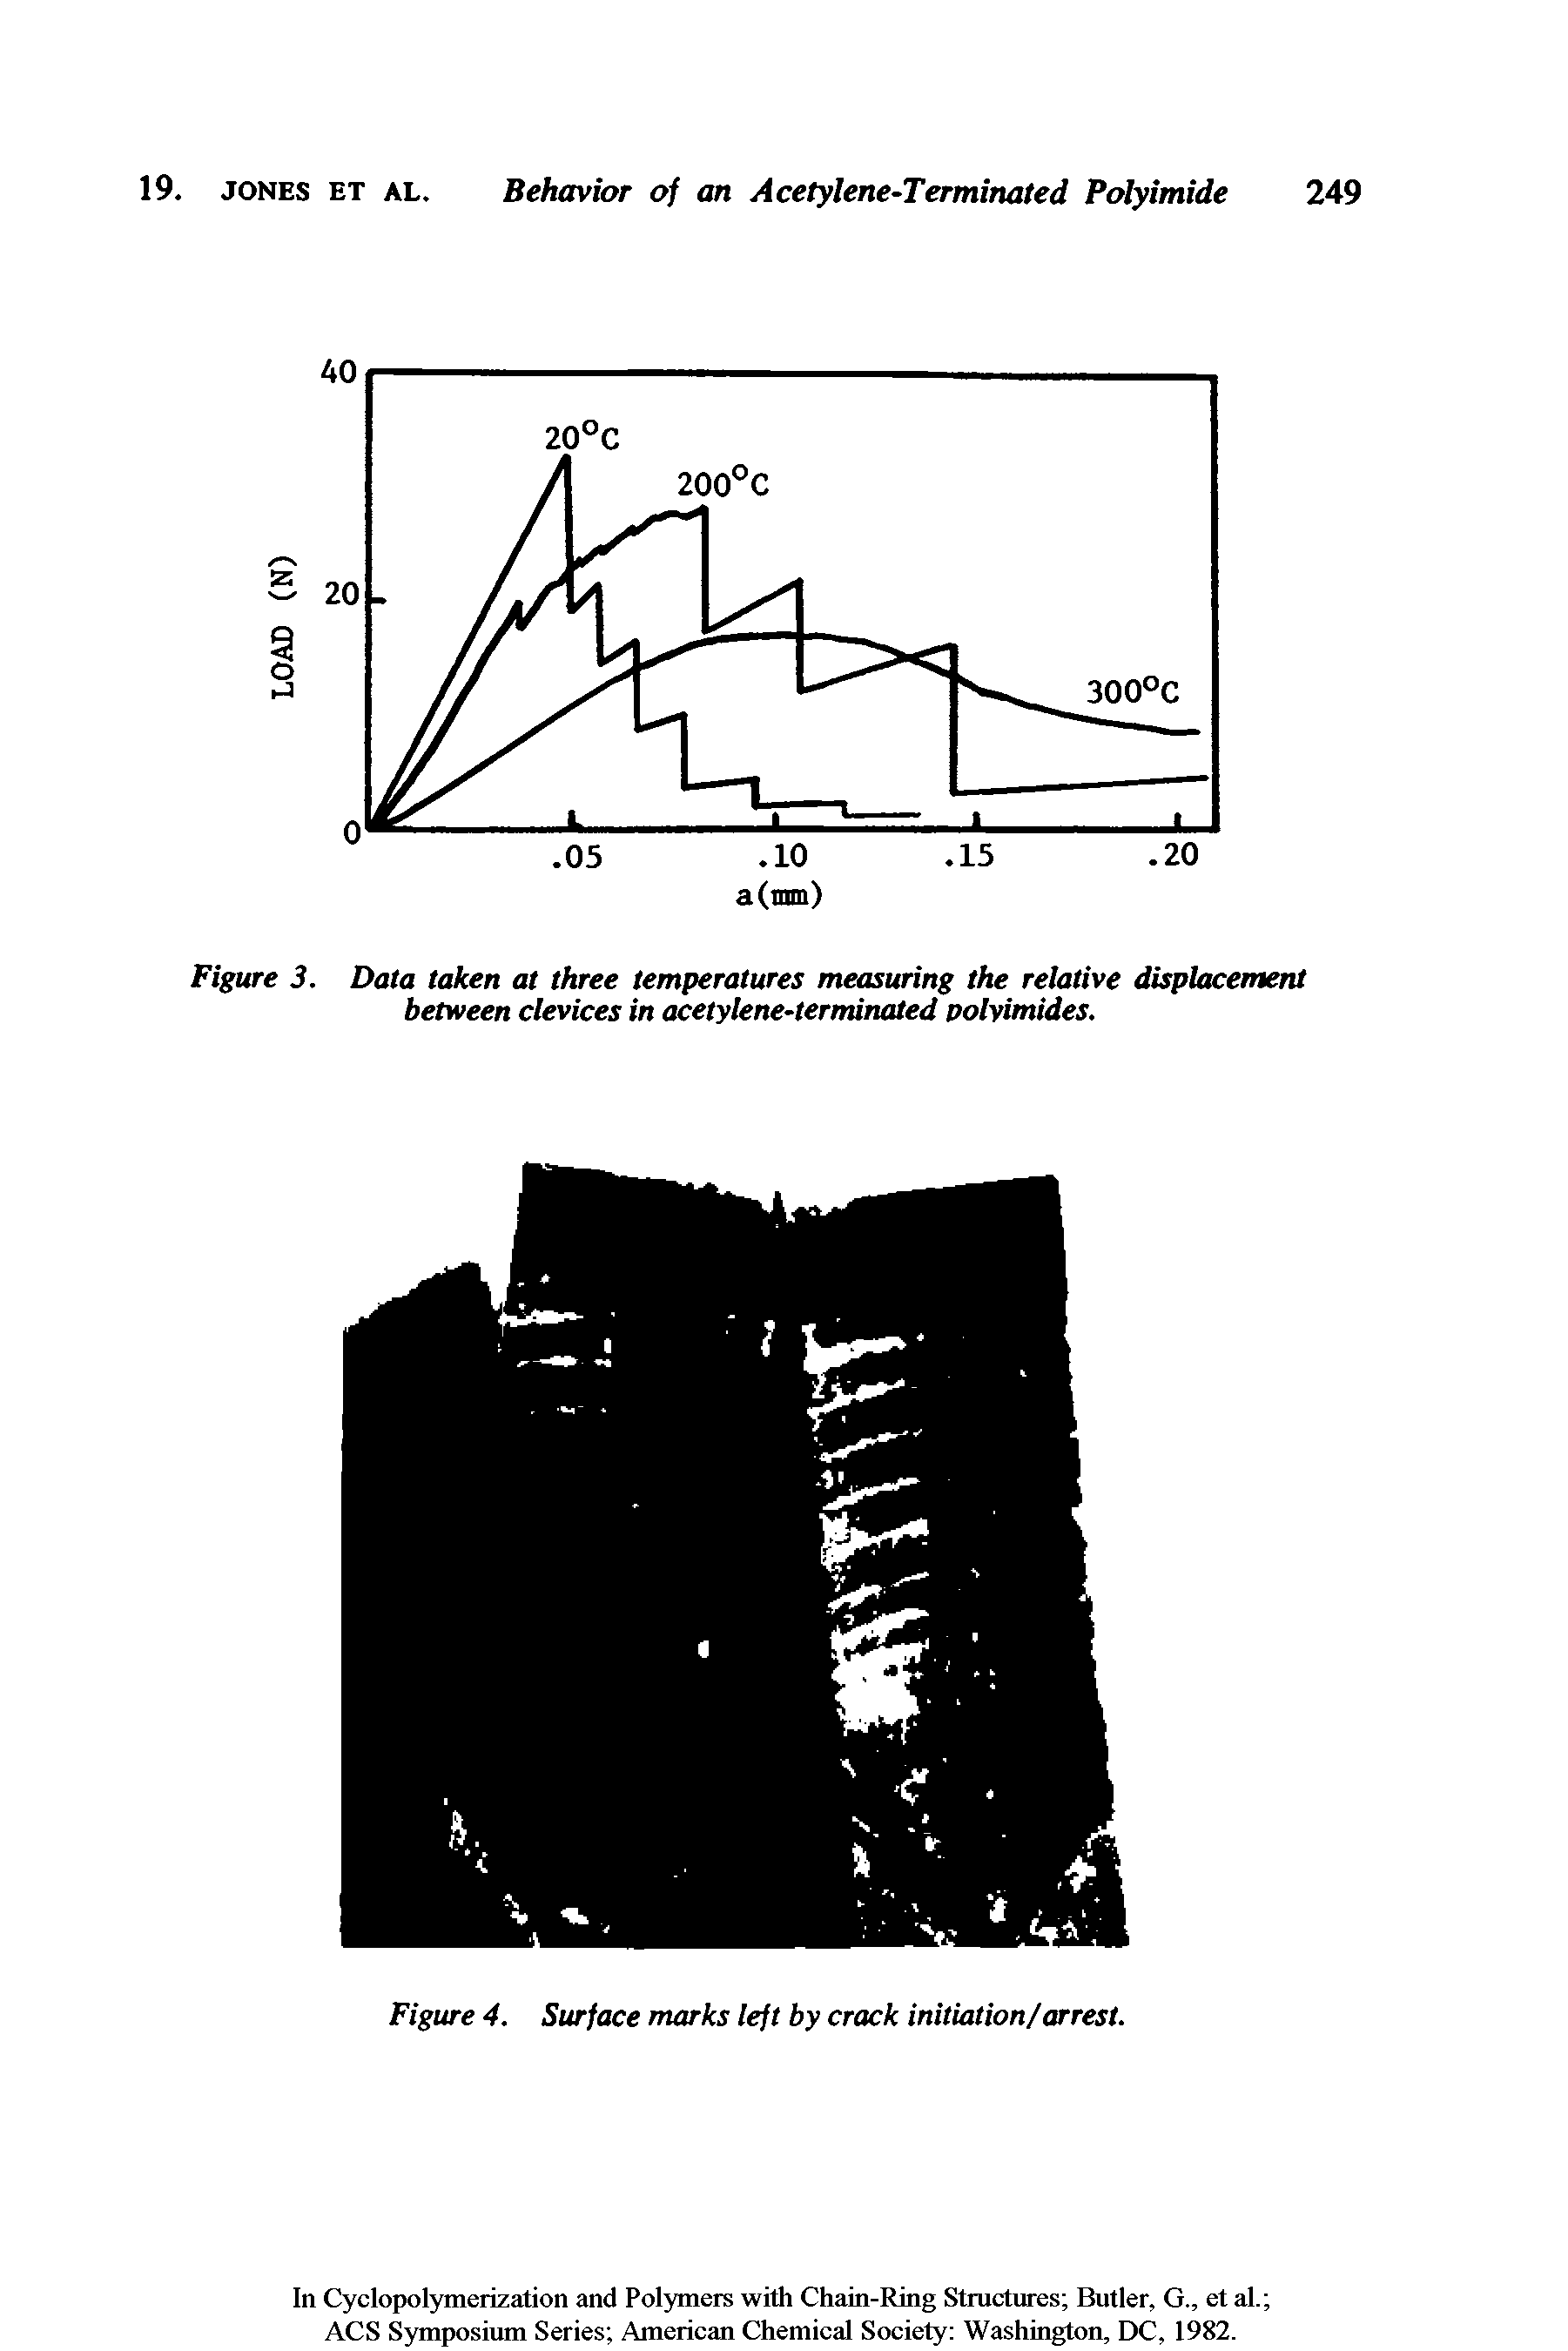 Figure 3. Data taken at three temperatures measuring the relative displacement between devices in acetylene-terminated polyimides.